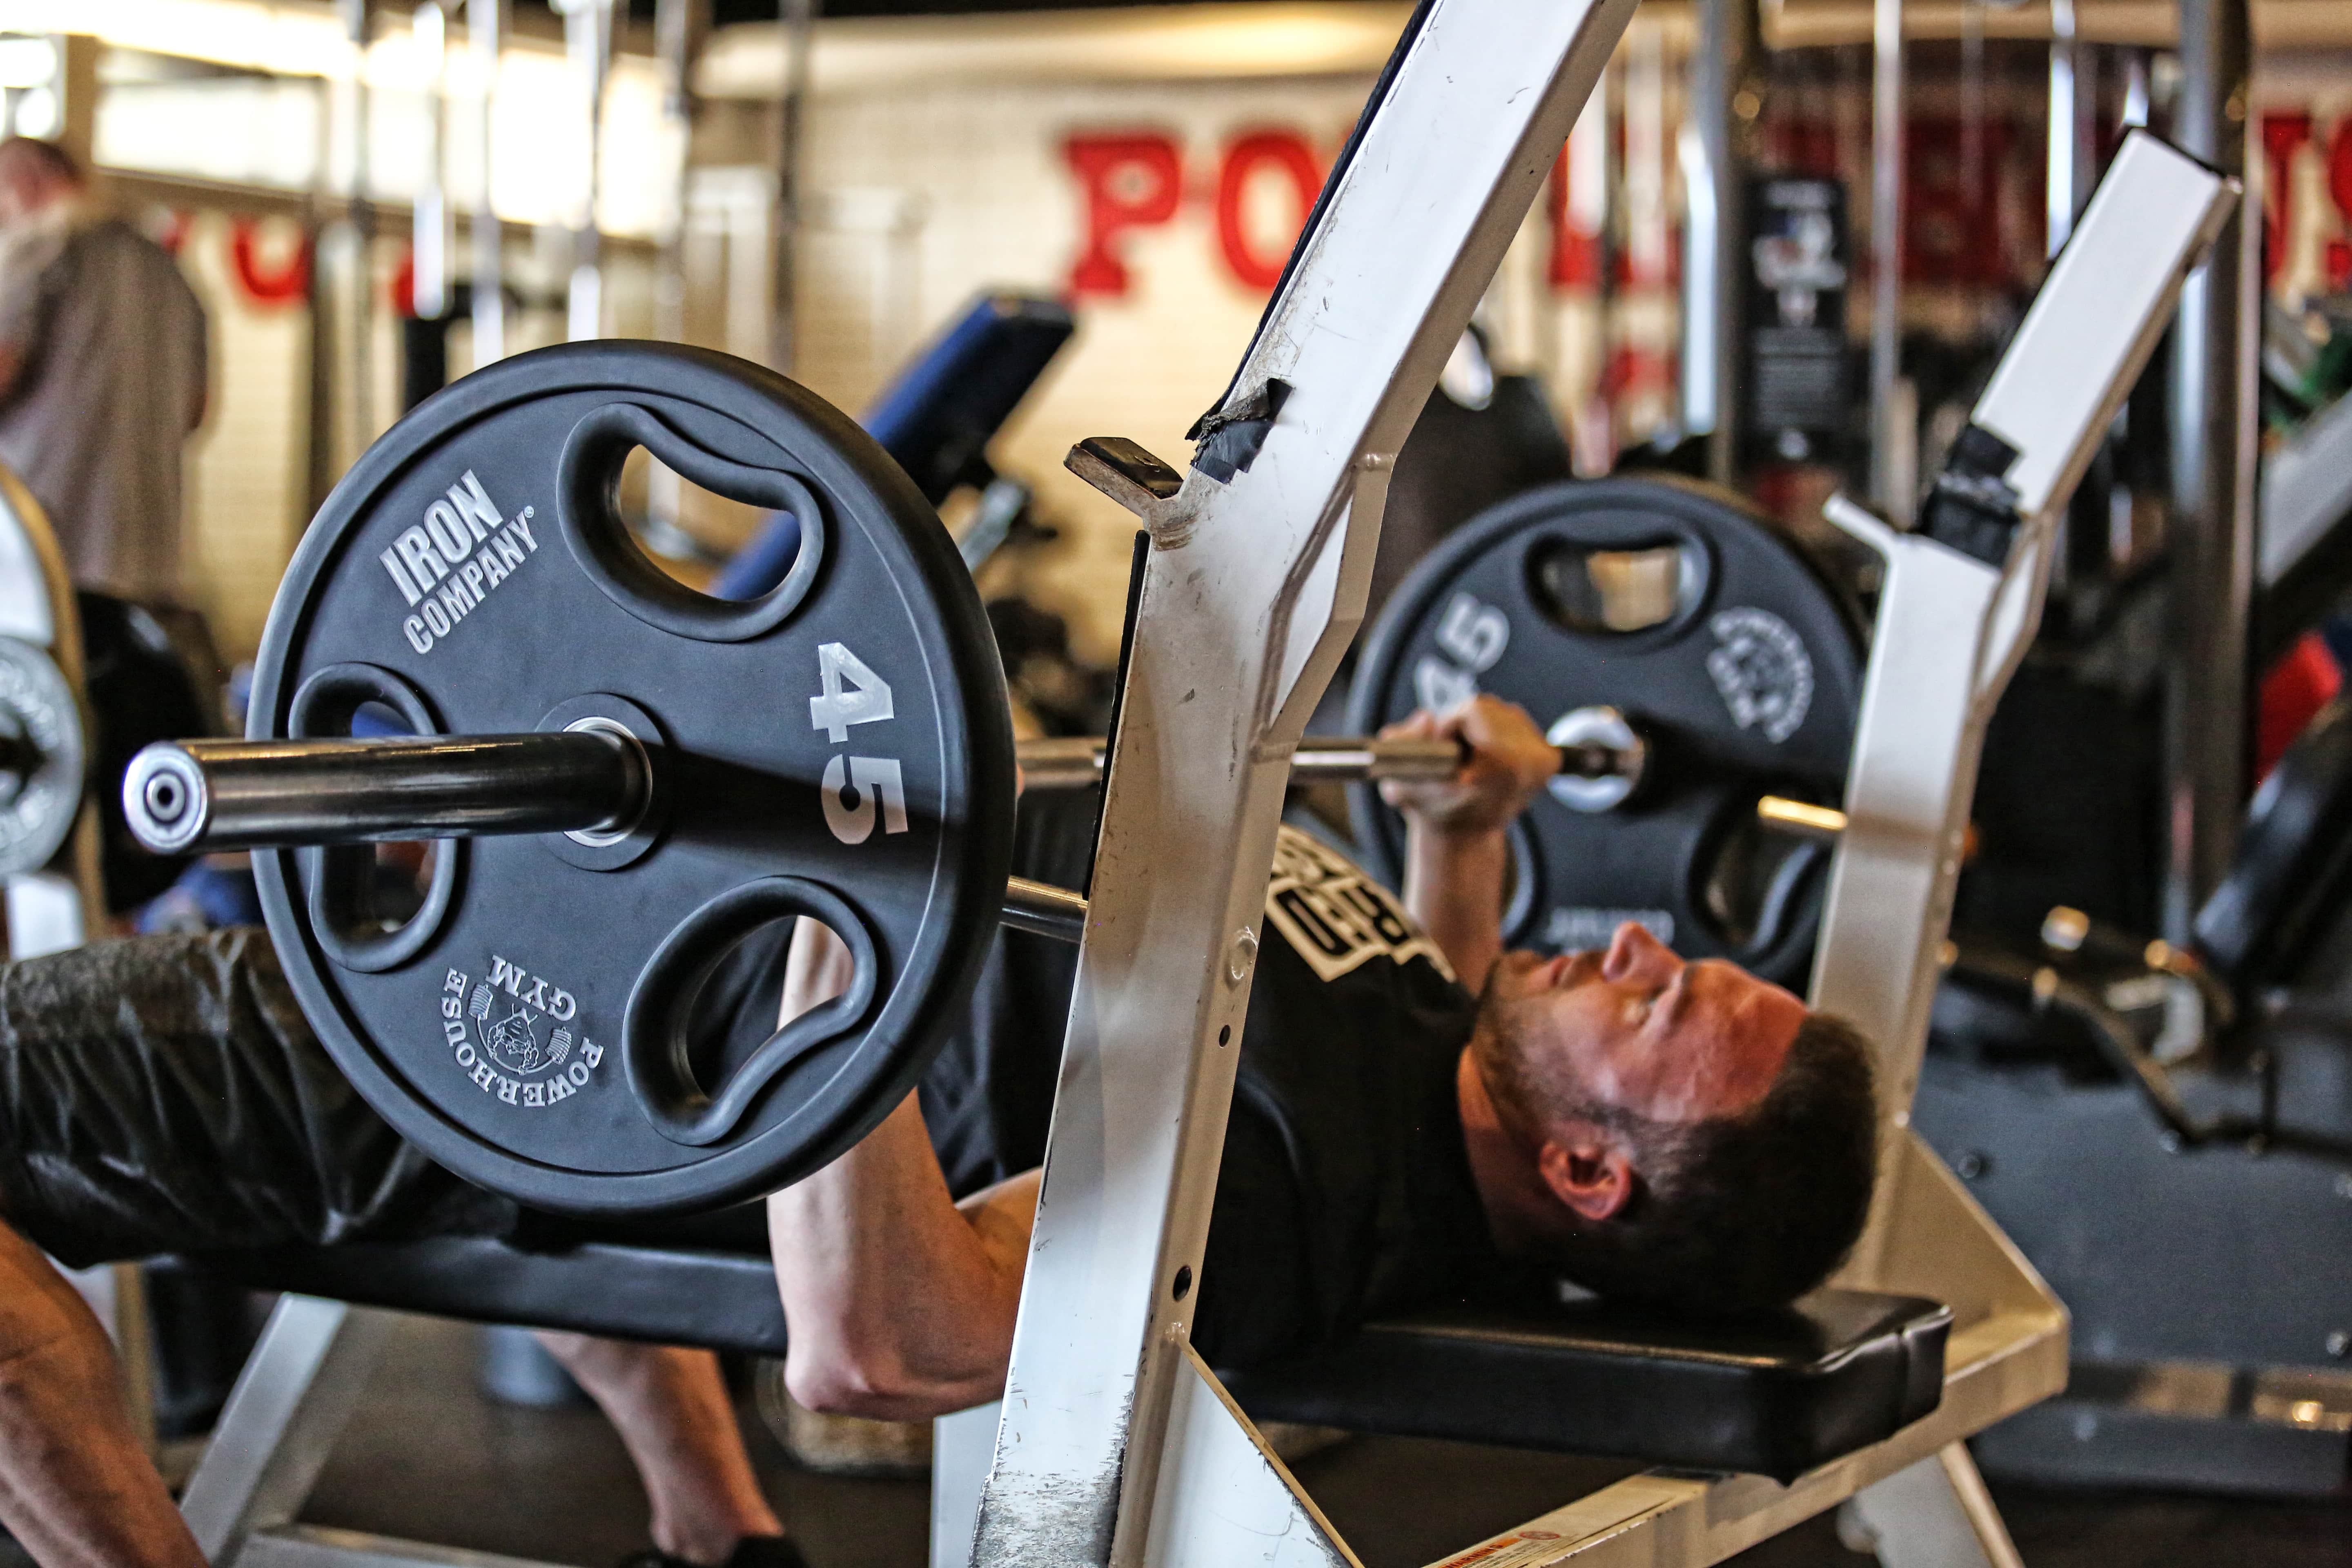 Gym Equipment Article By Stuart McRobert at IRON COMPANY